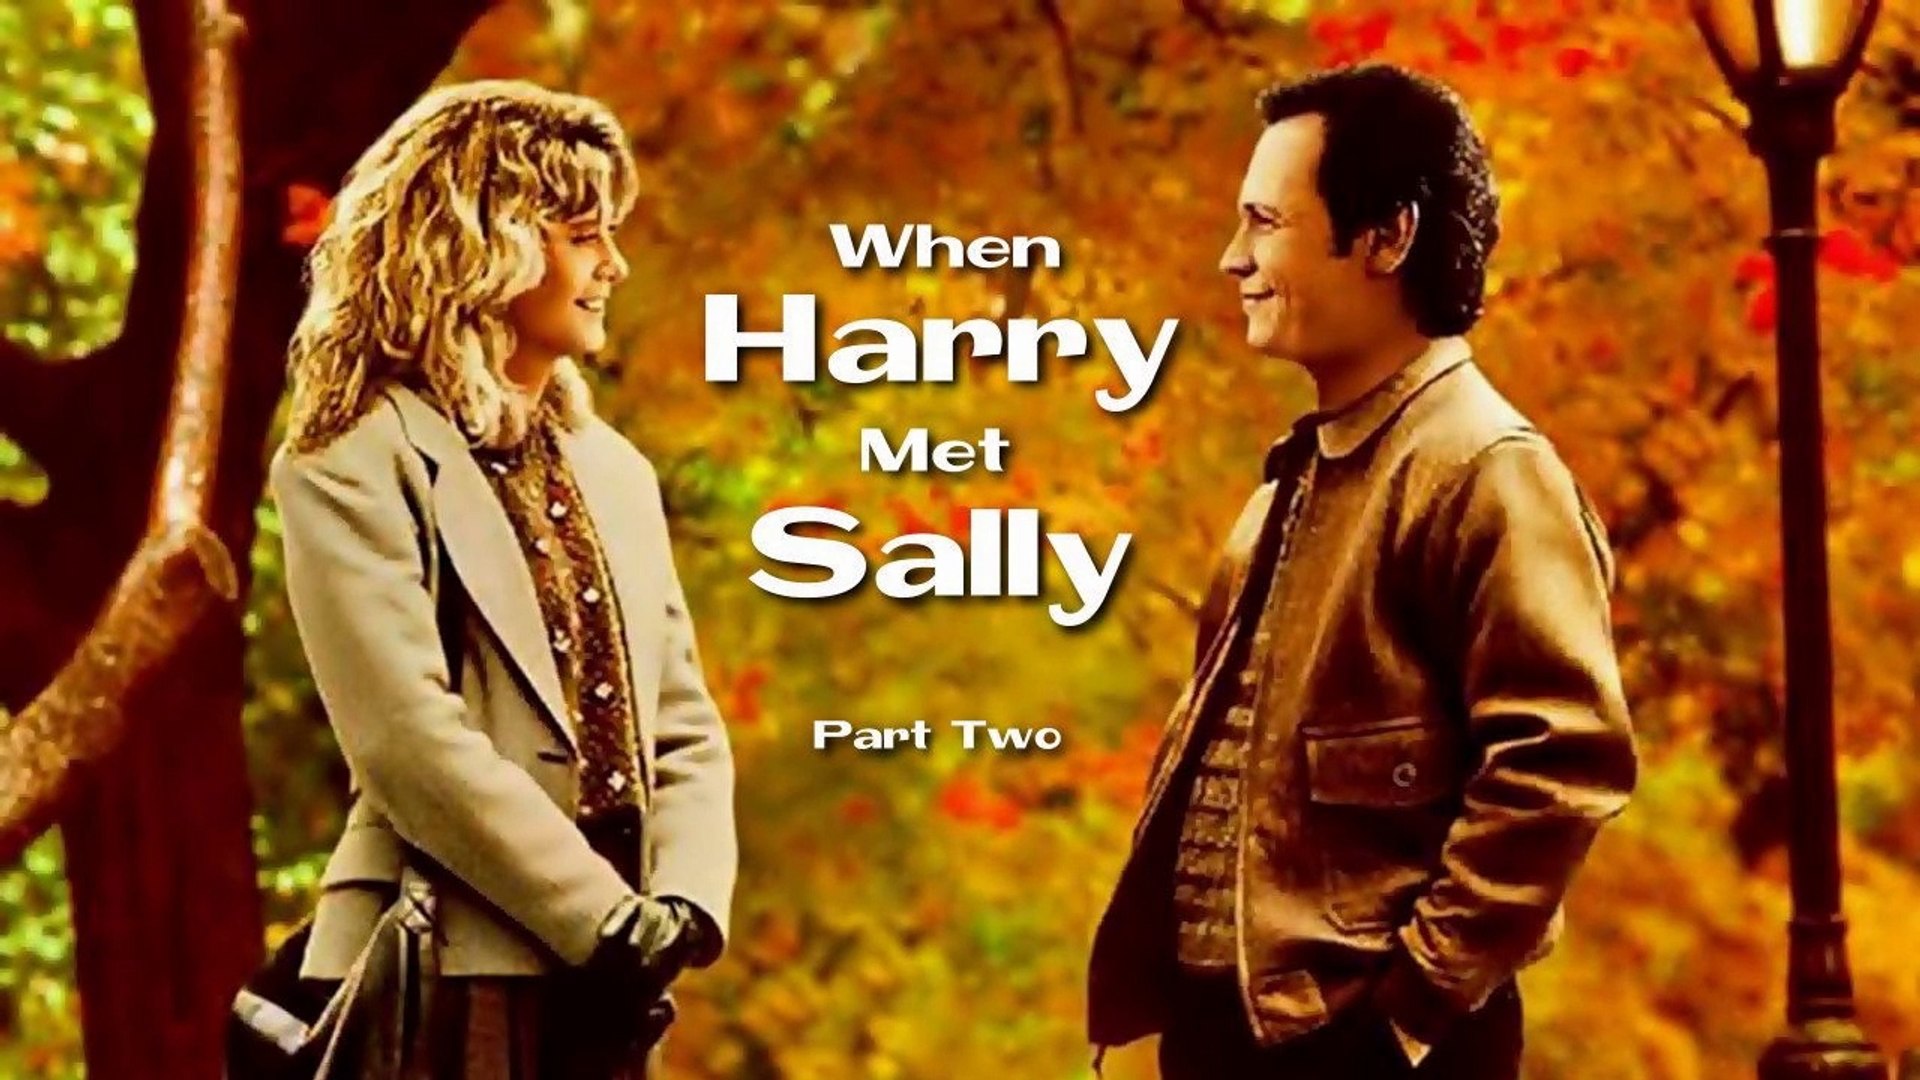 When Harry Met Sally (1989) Part Two (ENG) HD - Video Dailymotion